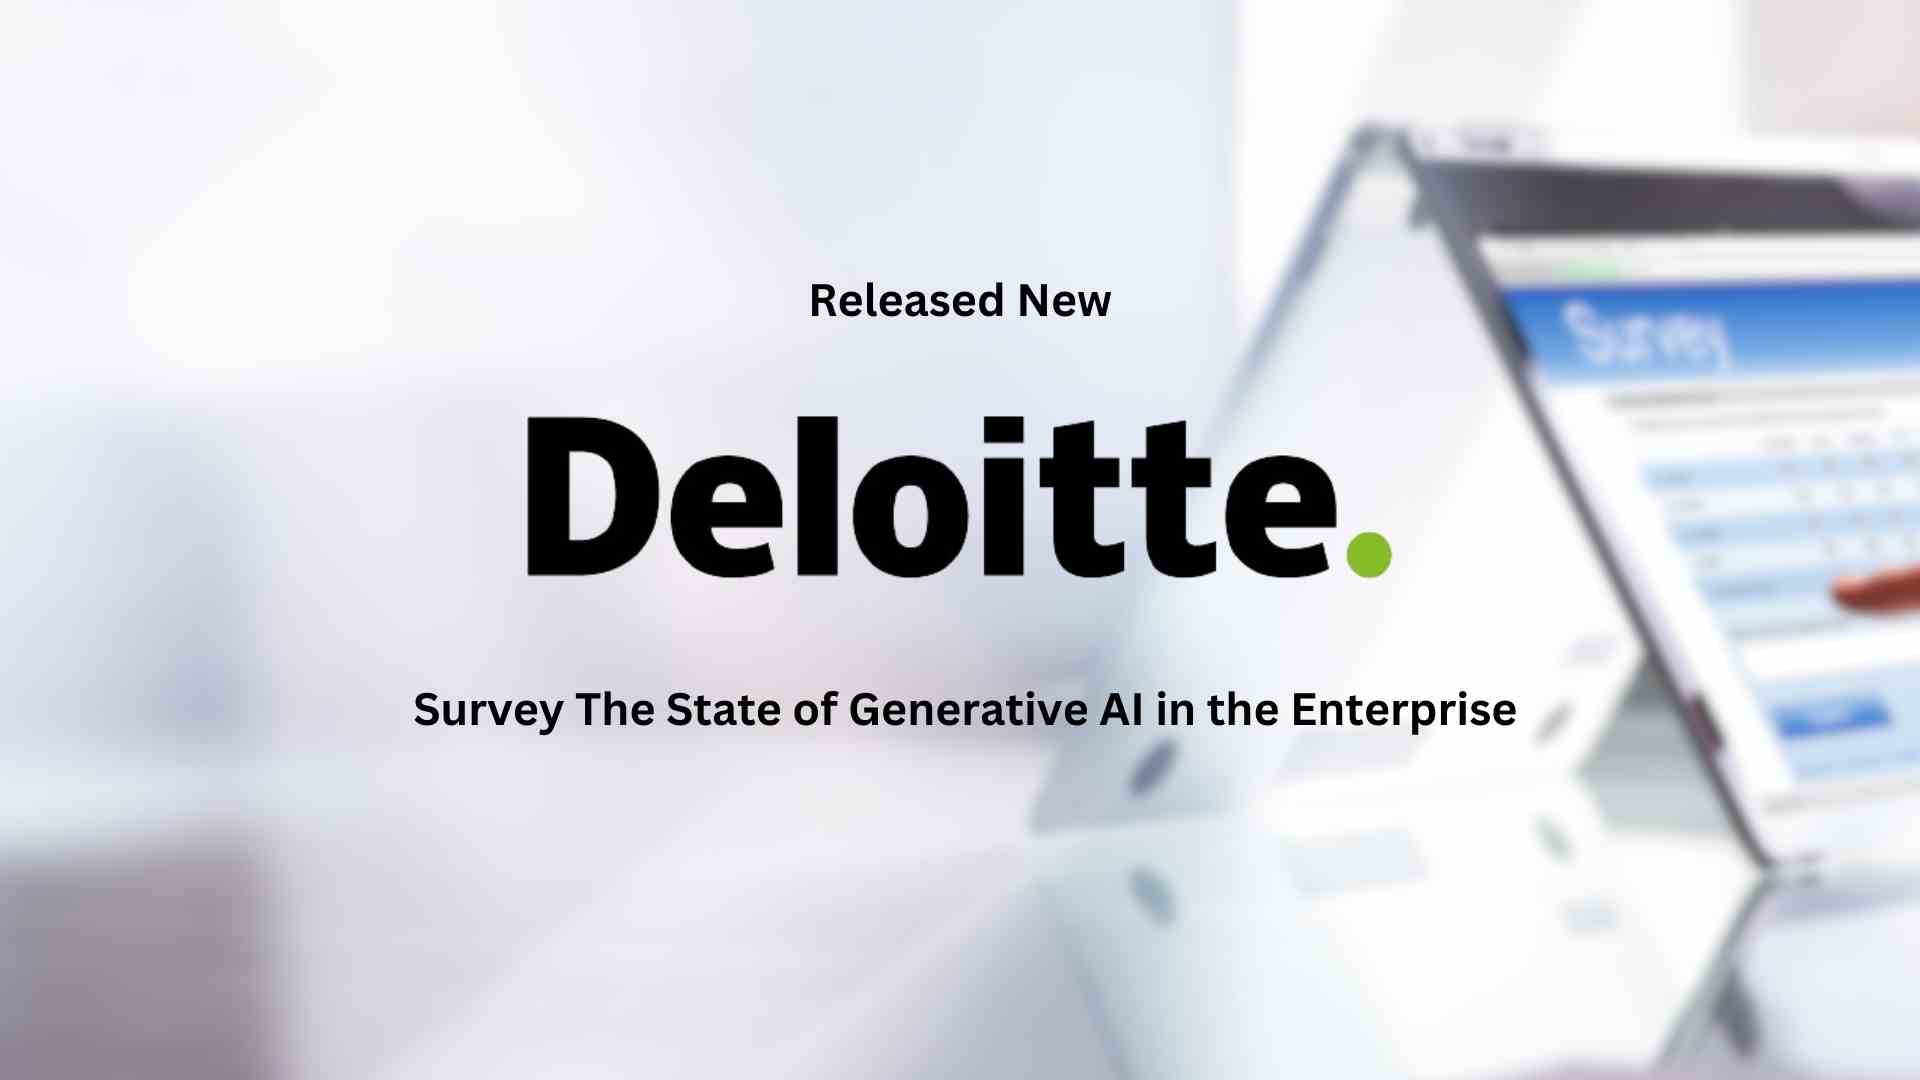 New Deloitte survey finds expectations for Gen AI remain high, but many are feeling pressure to quickly realize value while managing risks